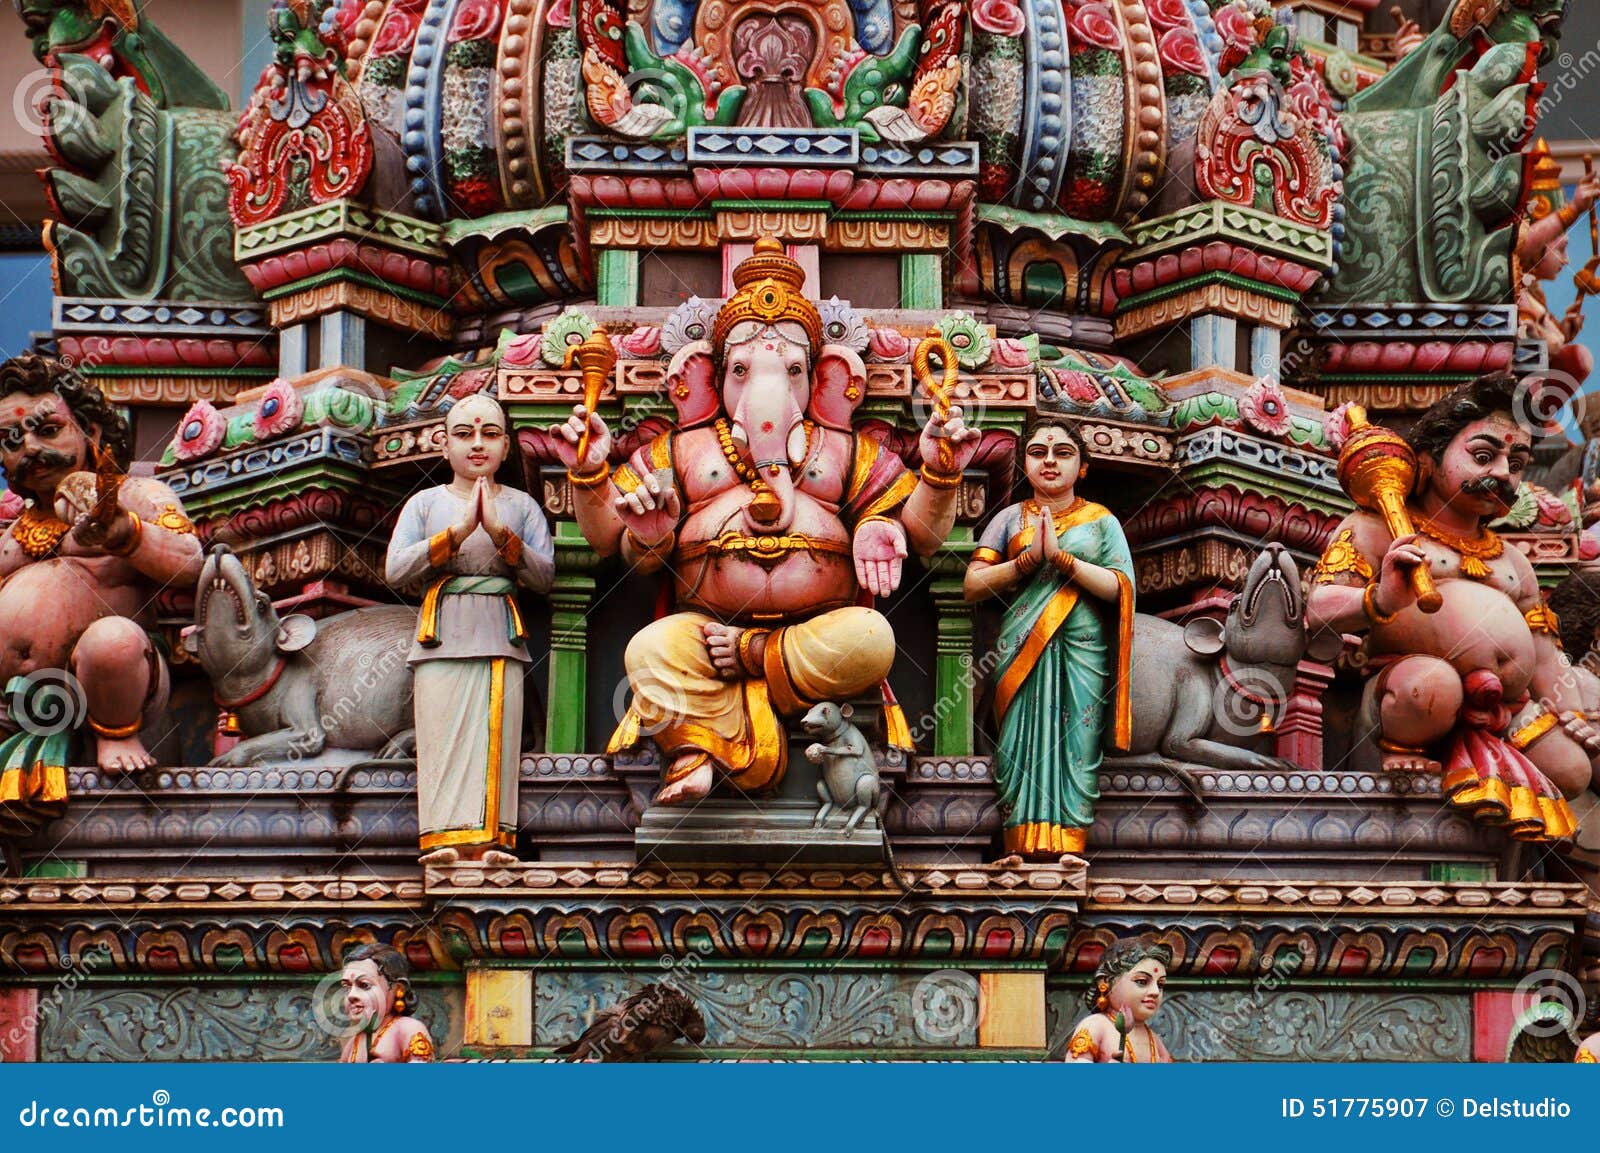 statue of ganesh on a colorful indian temple facade